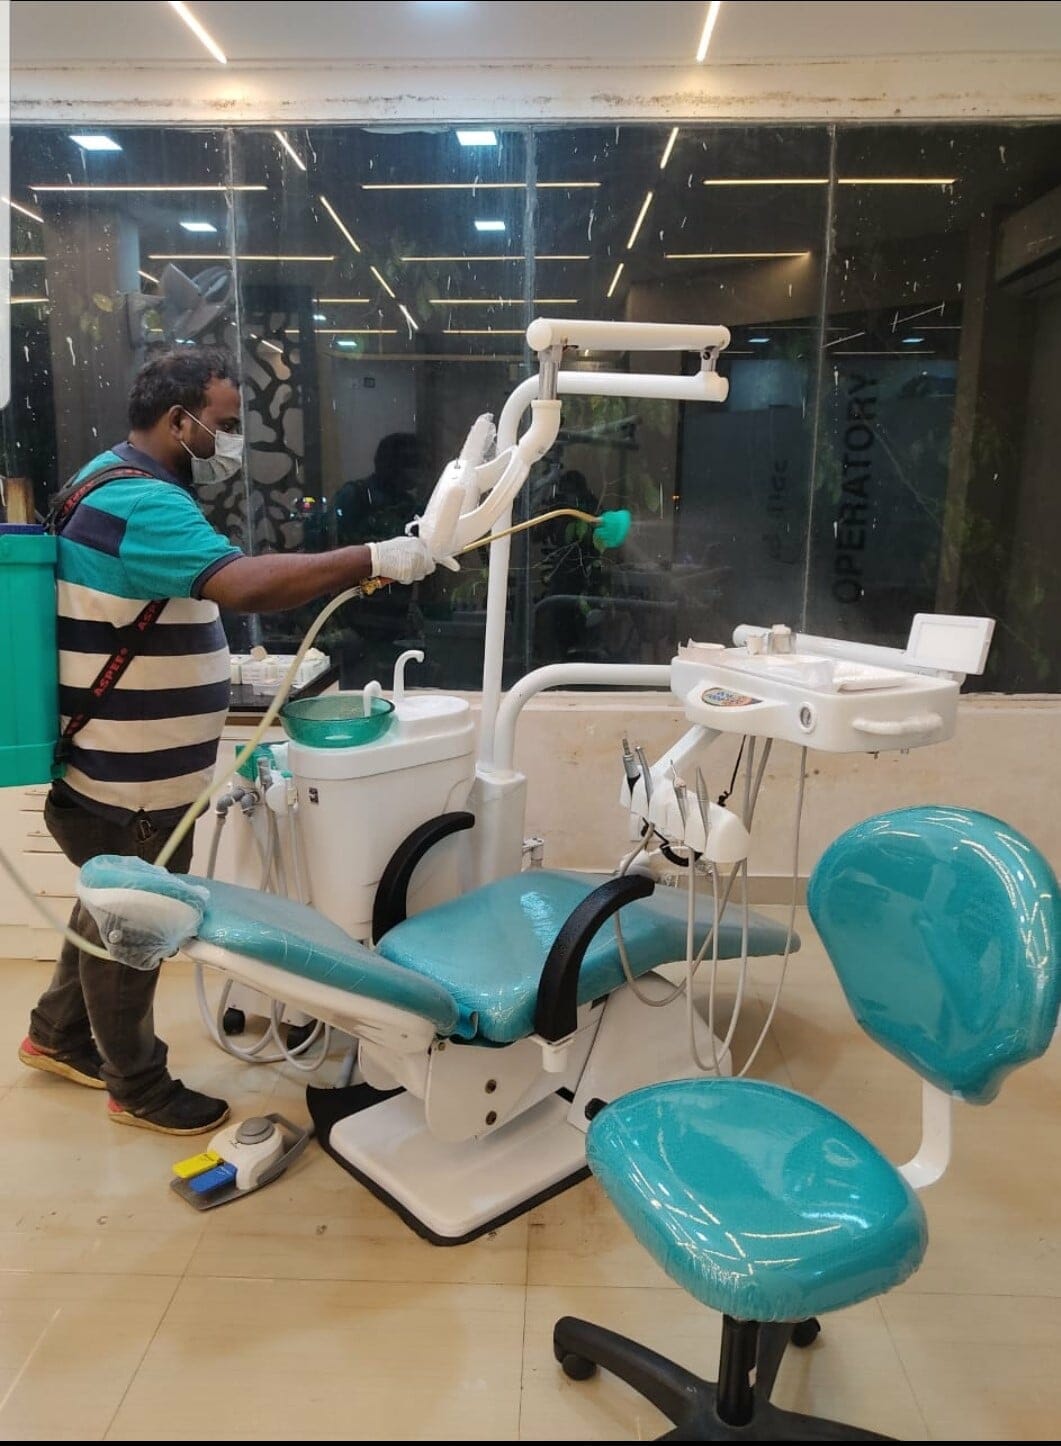 Using a disinfectant sprayer, a sanitation worker disinfects the dental clinic chair and tray